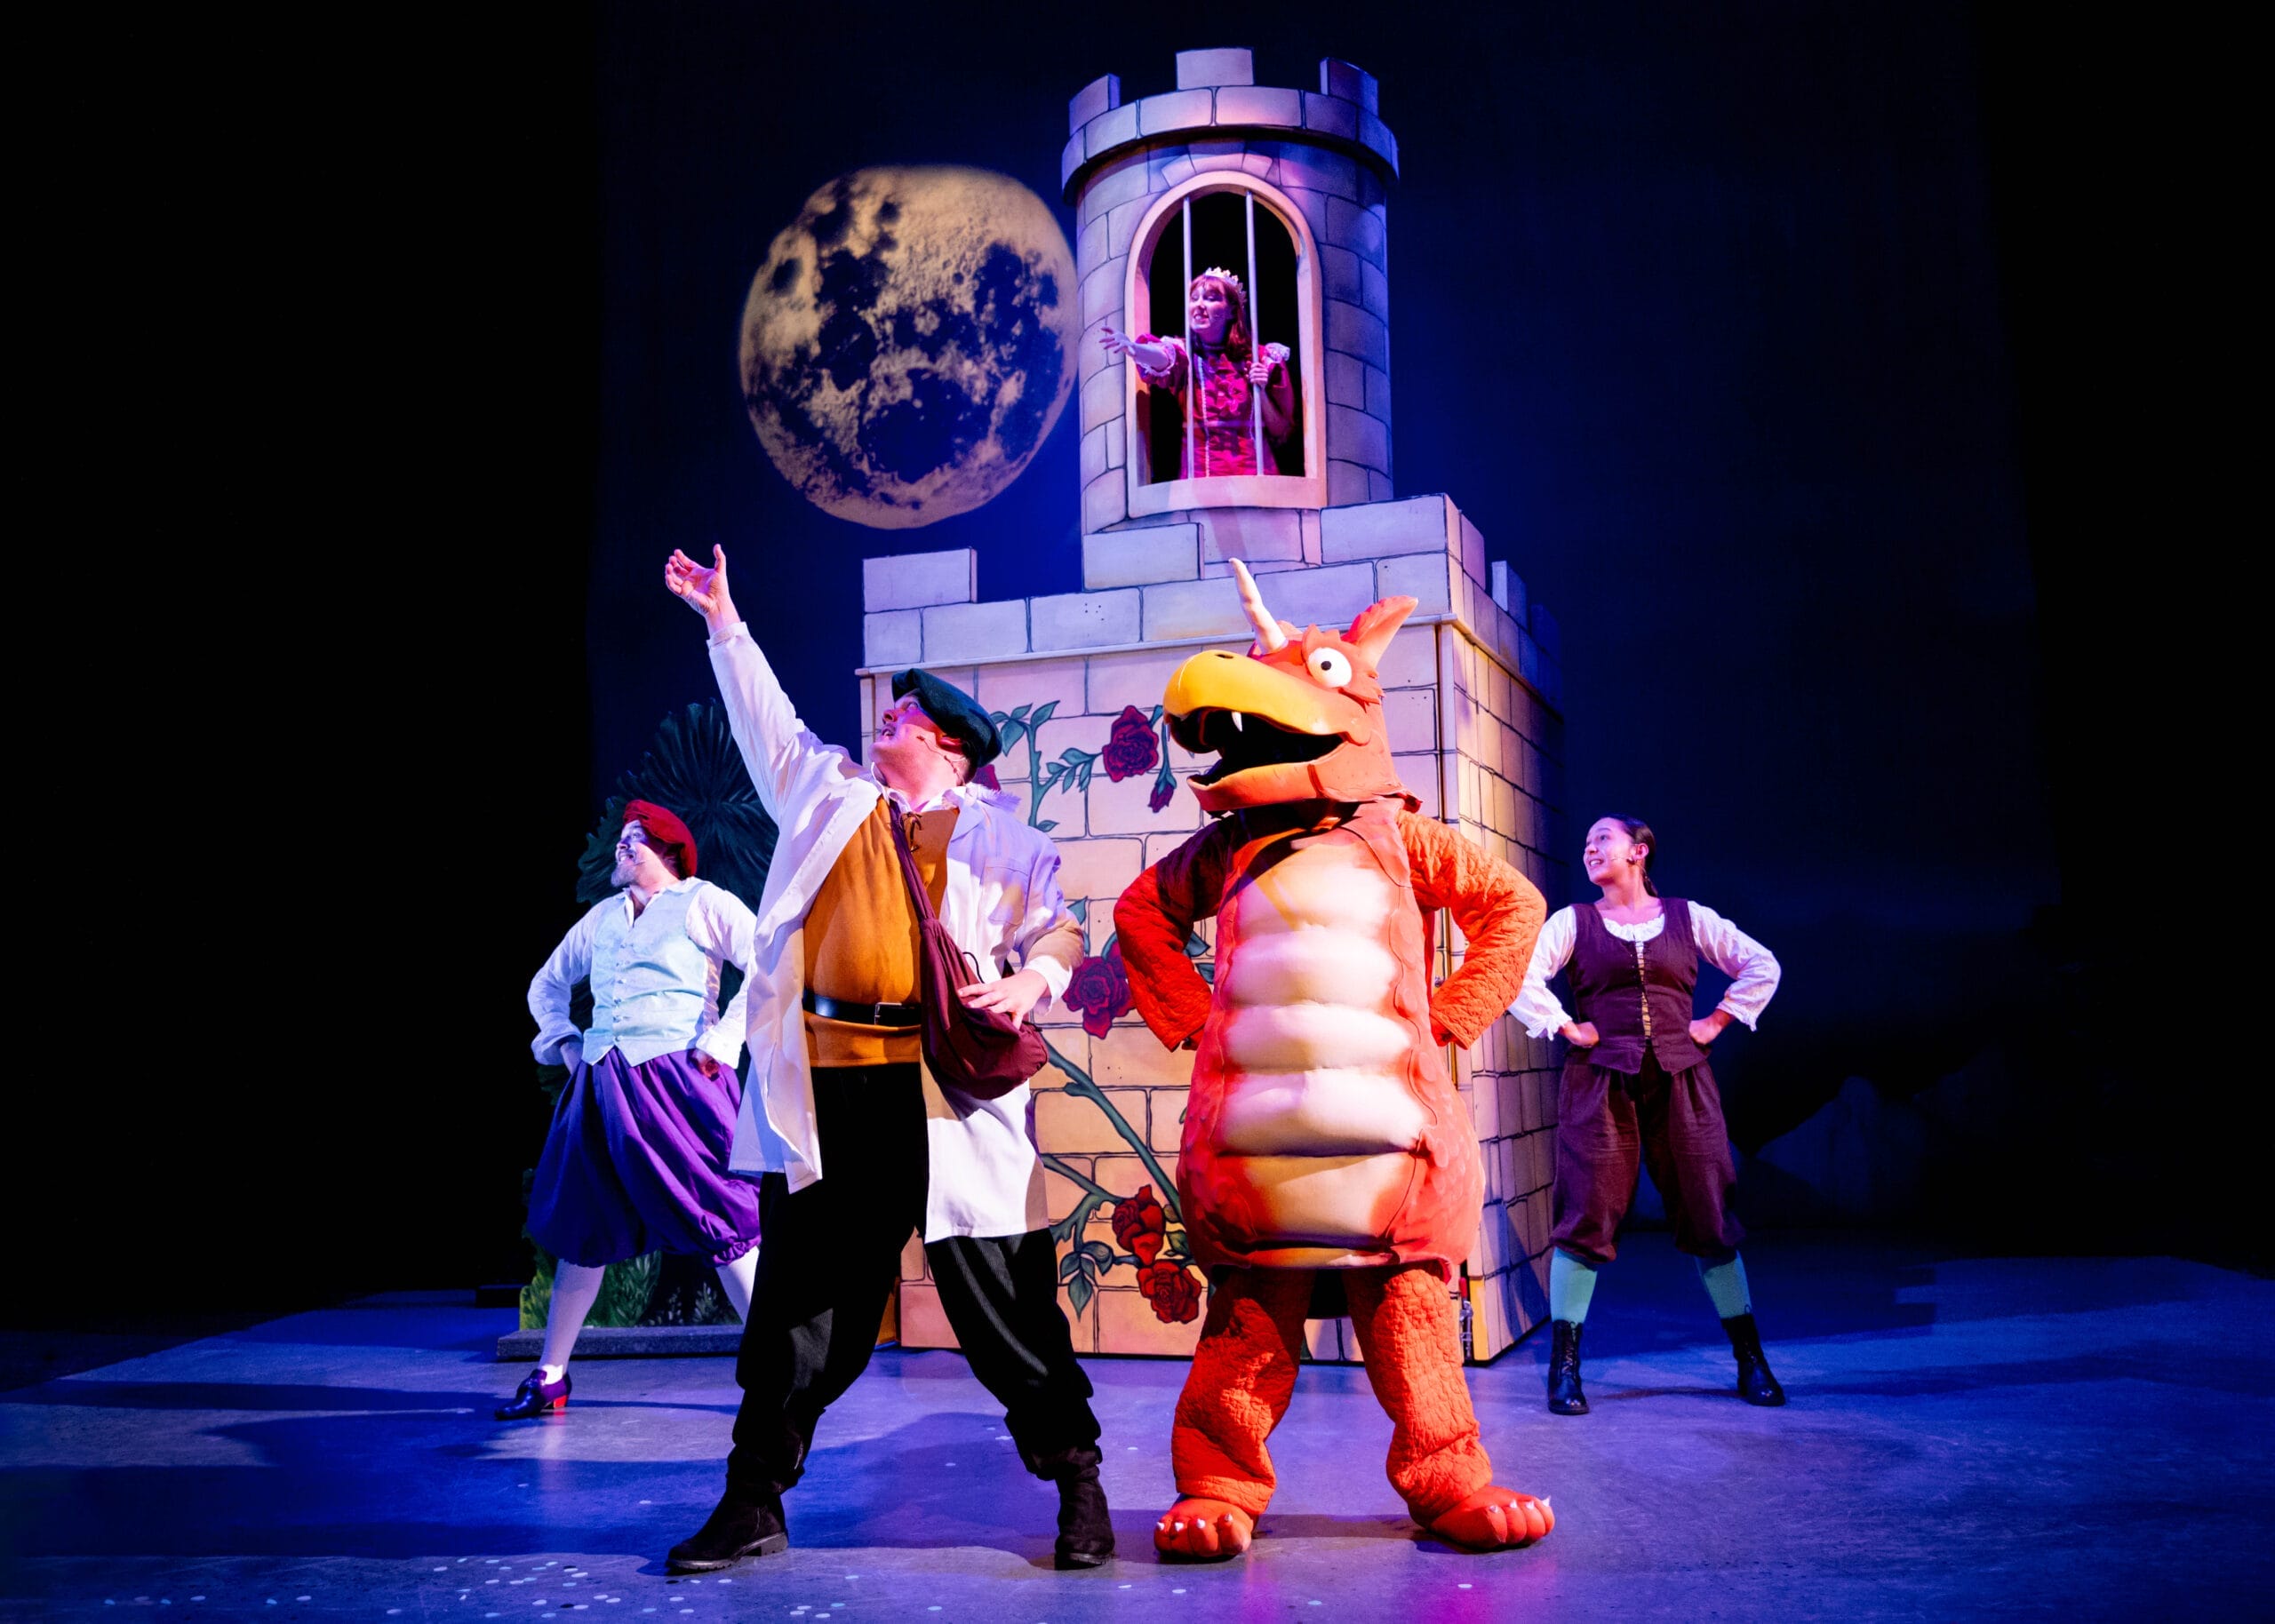 Zog the orange dragon stands at the front of the stage with his hands on his hips alongside 3 other performers in the same pose. Behind him is a castle in which the princess is trapped in a tower, she reaches her arms through the barred window.